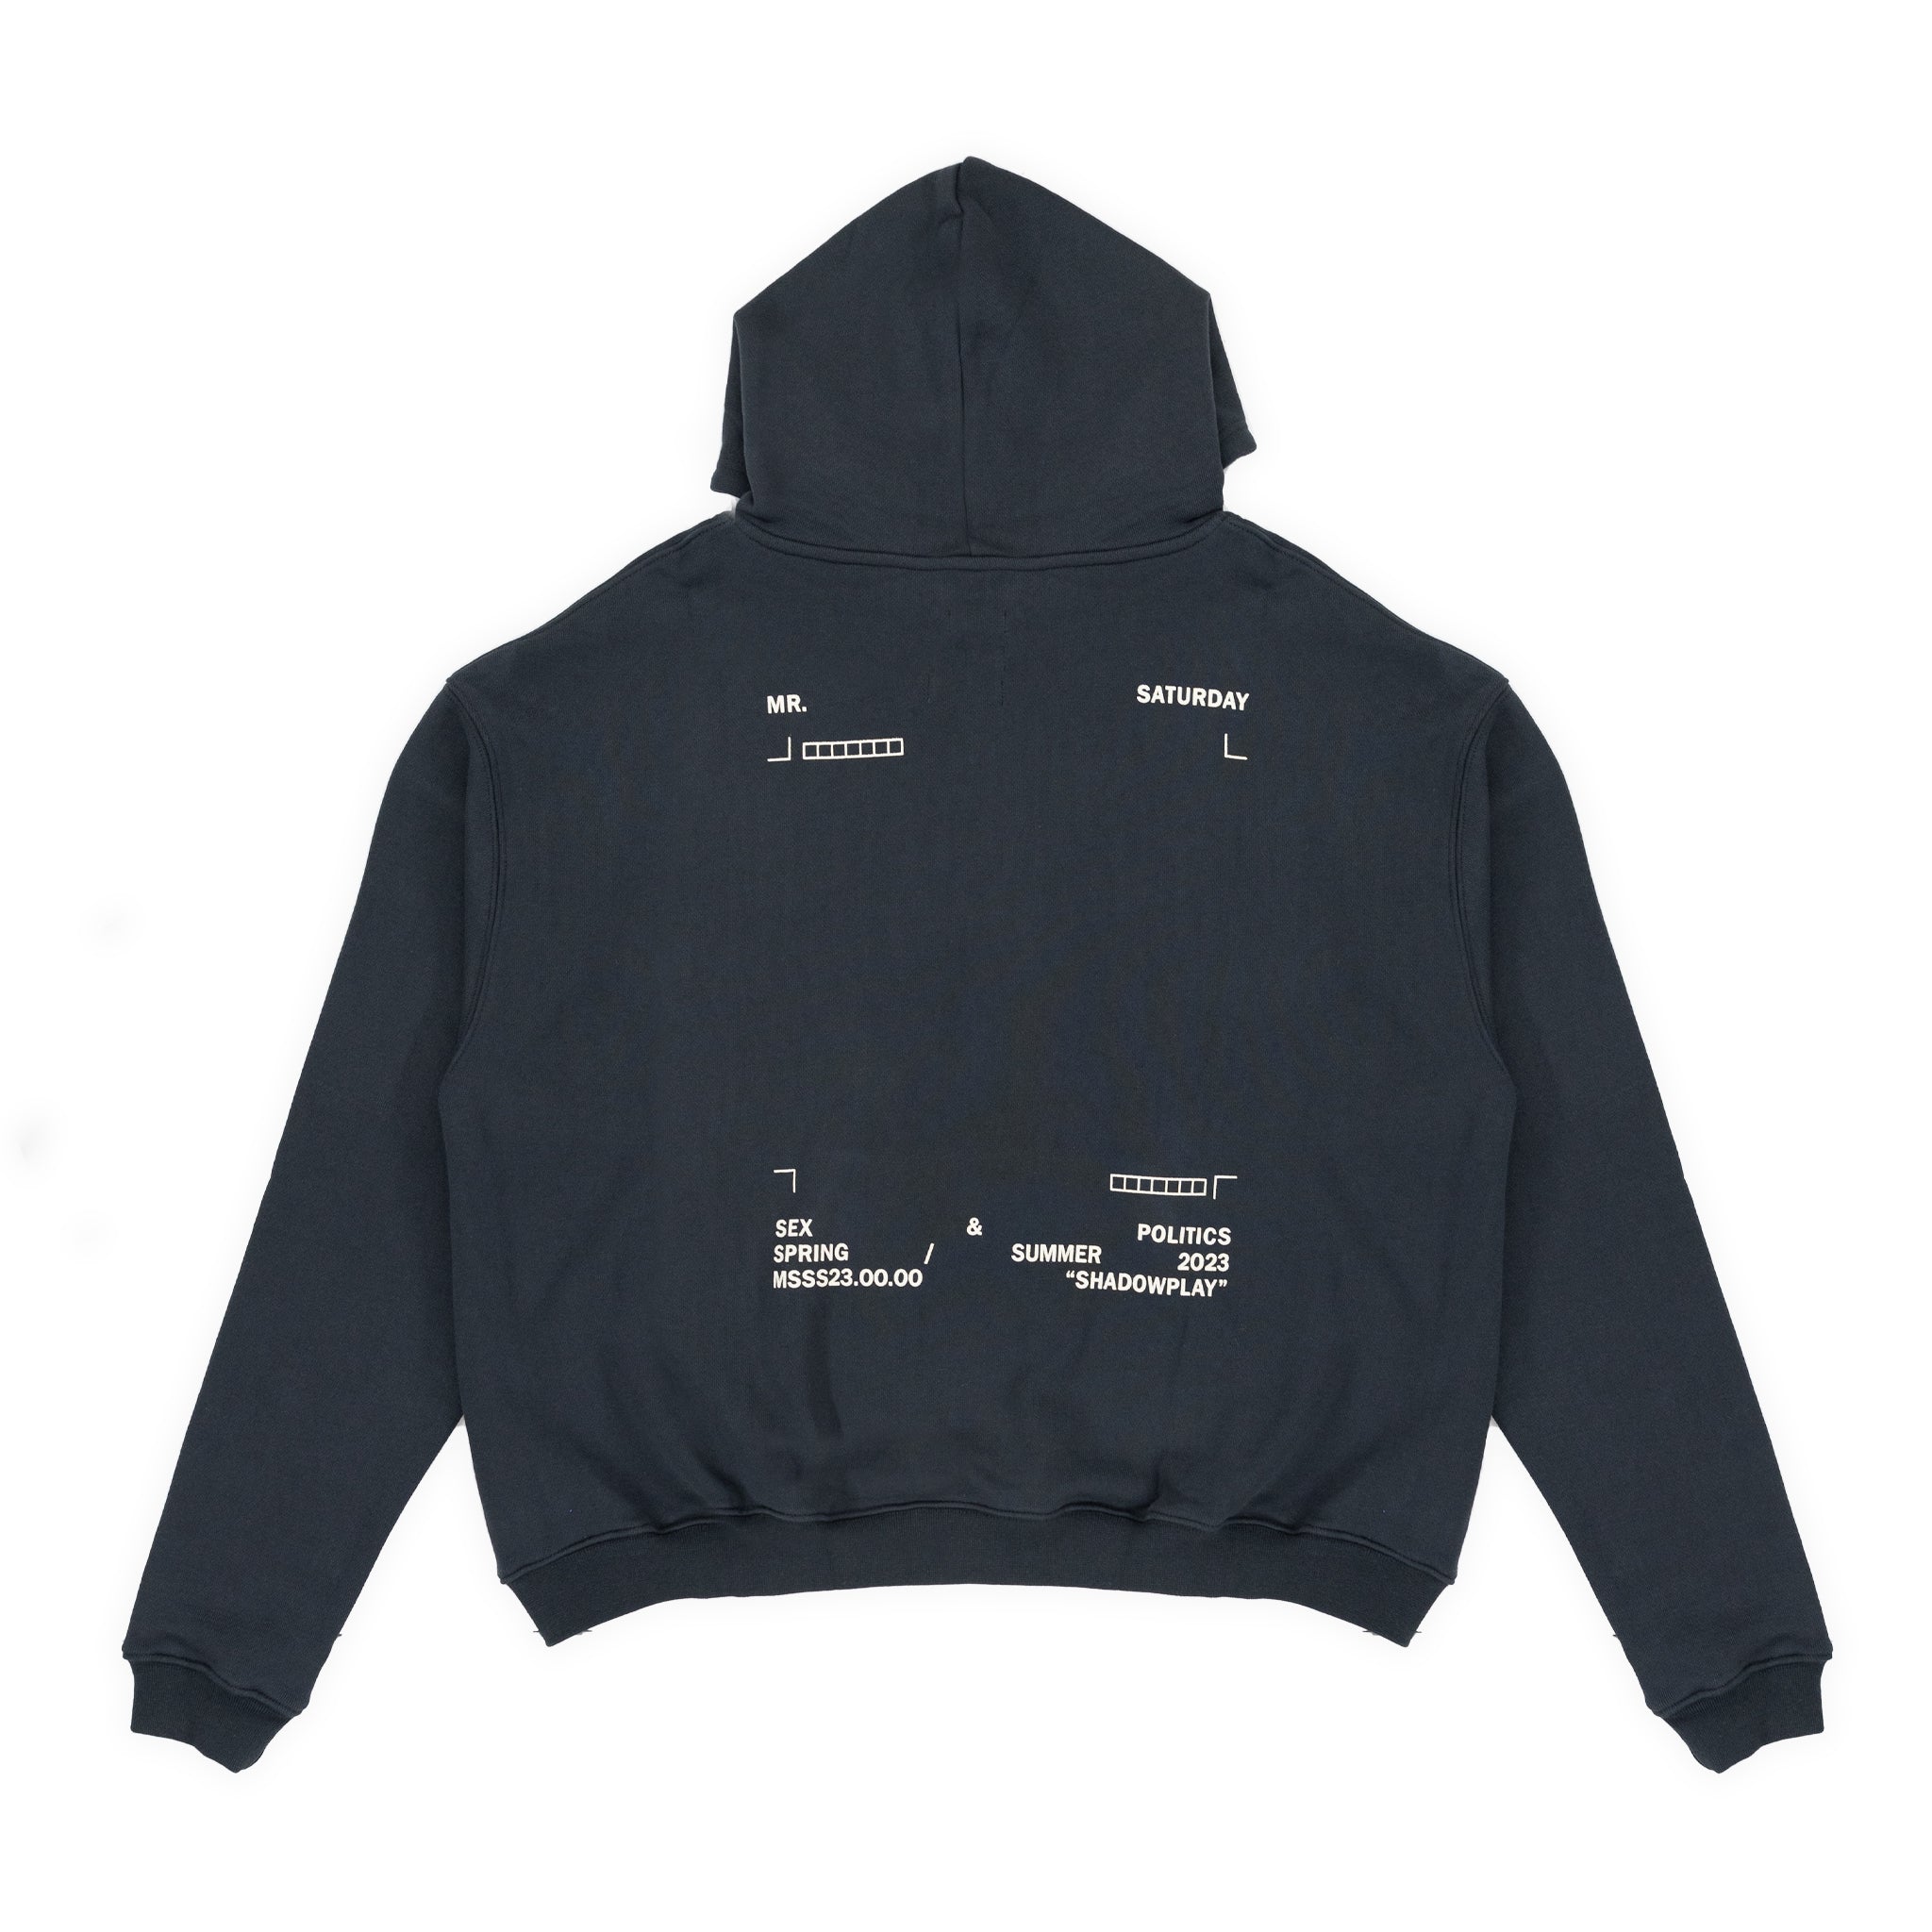 "Gallery Wall" Hoodie - Cotton